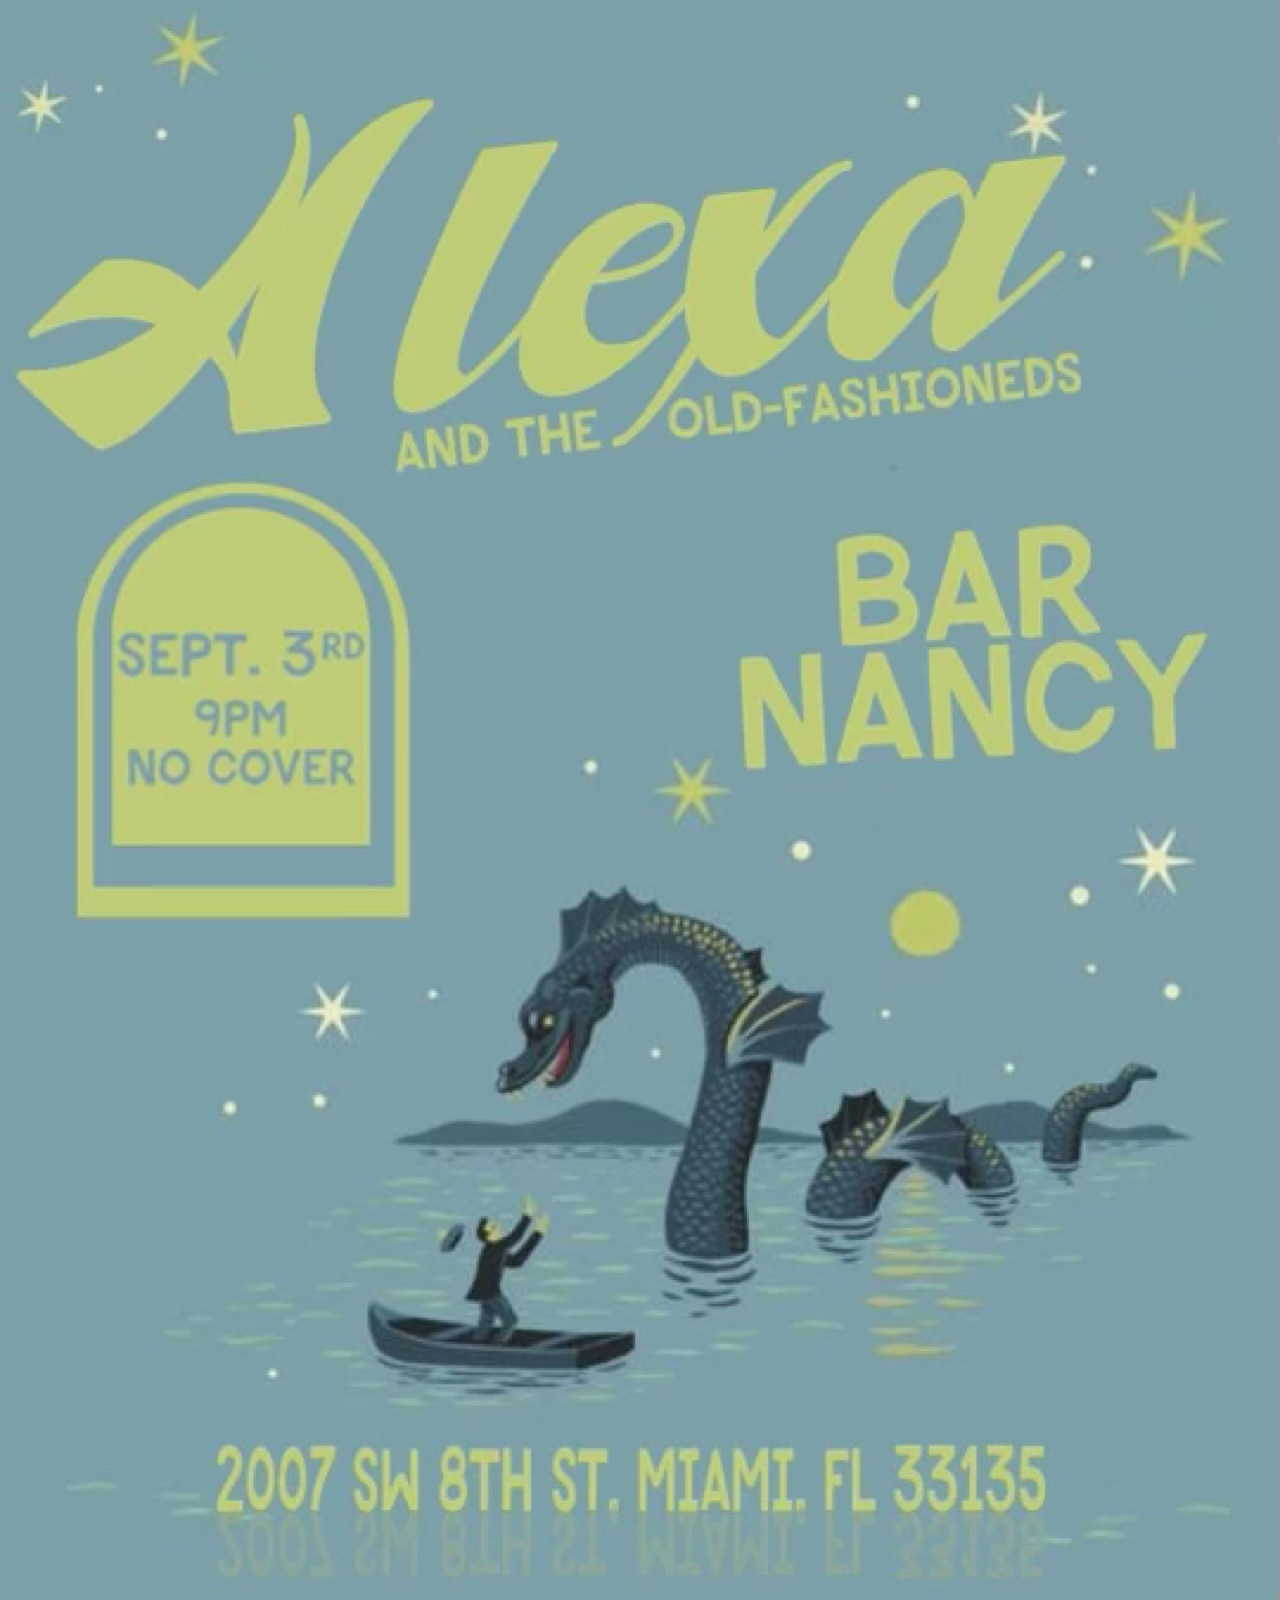 Alexa and The Old-Fashioneds at Bar Nancy Sept 3rd at 9PM